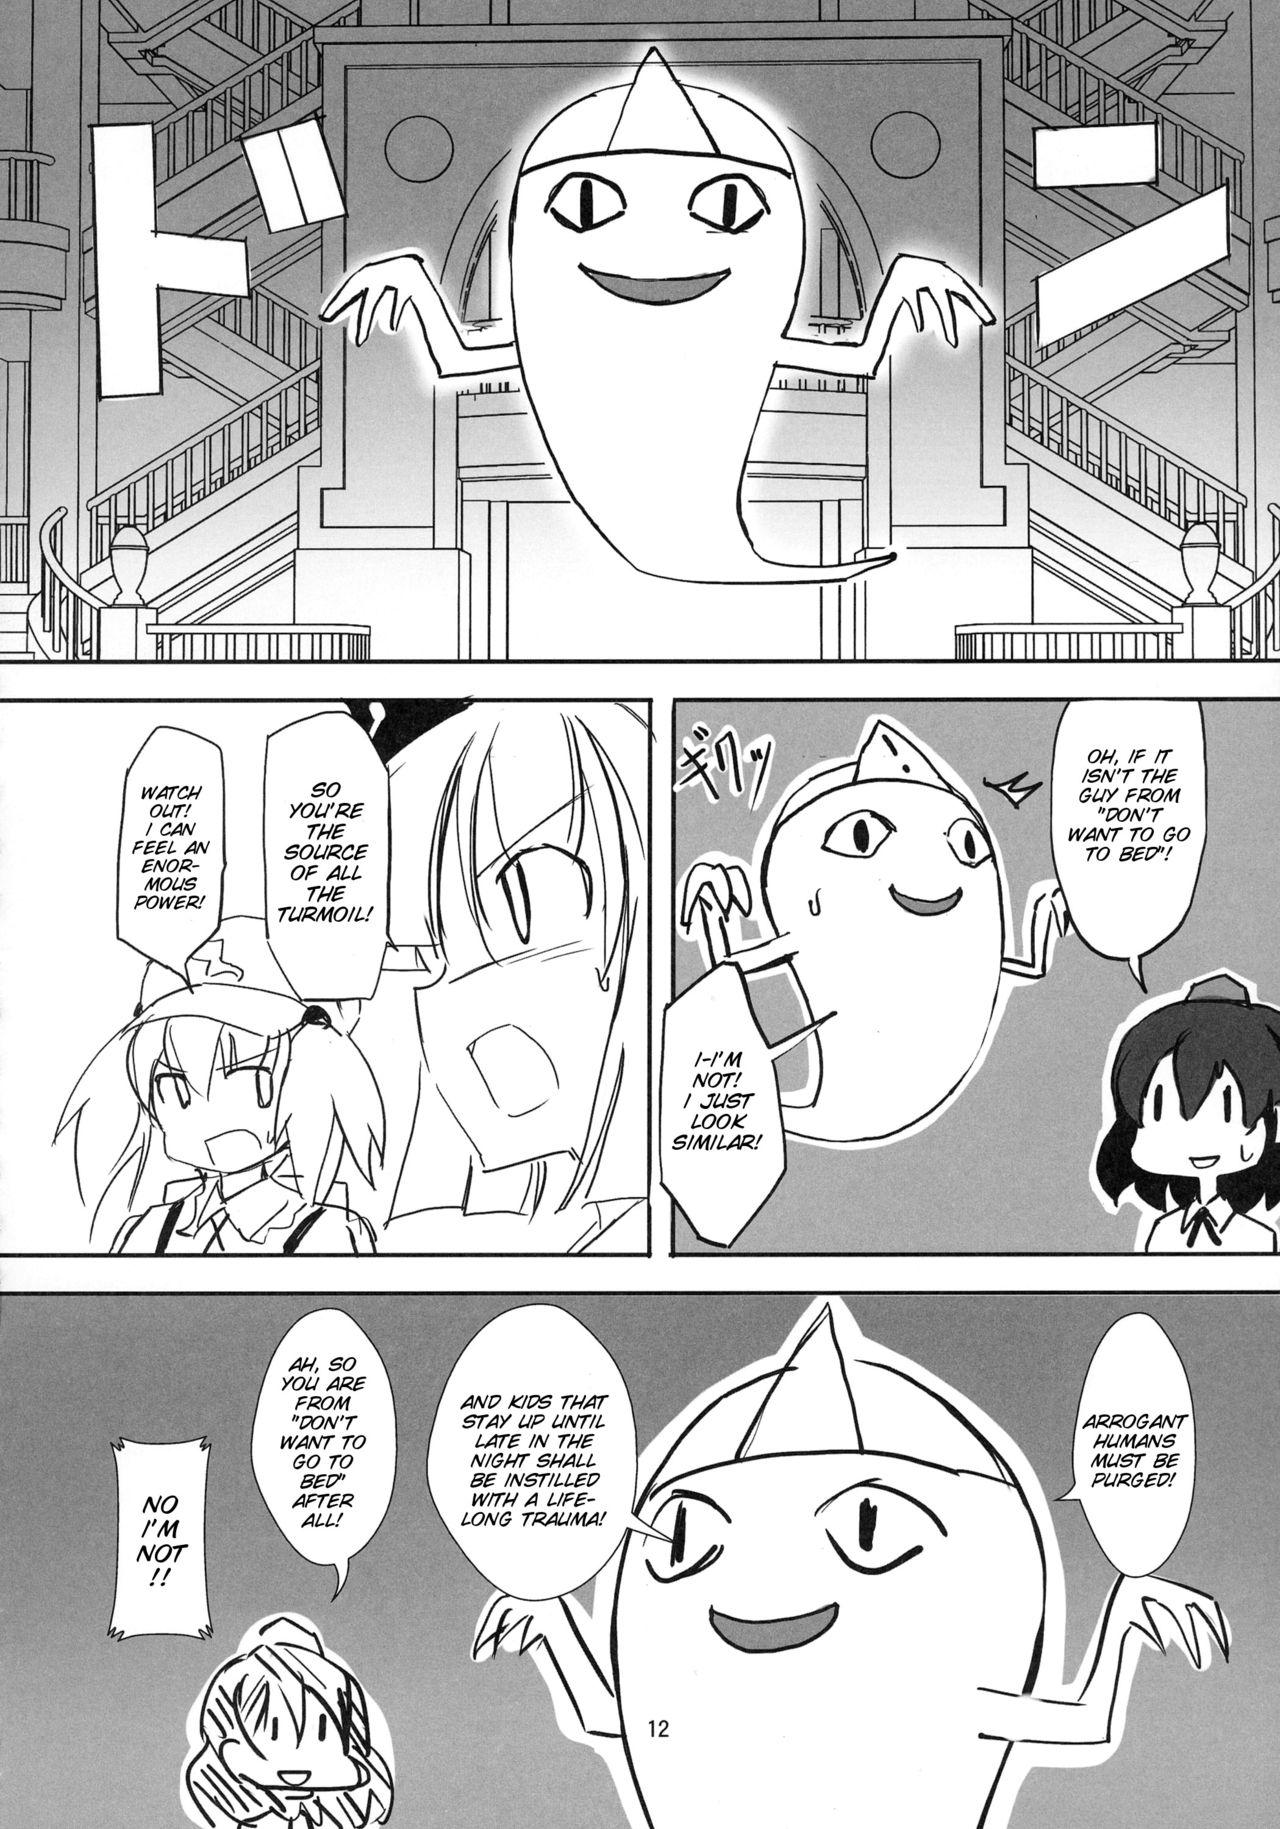 Bus TFC BUSTERS - Touhou project Ghostbusters Pau - Page 13